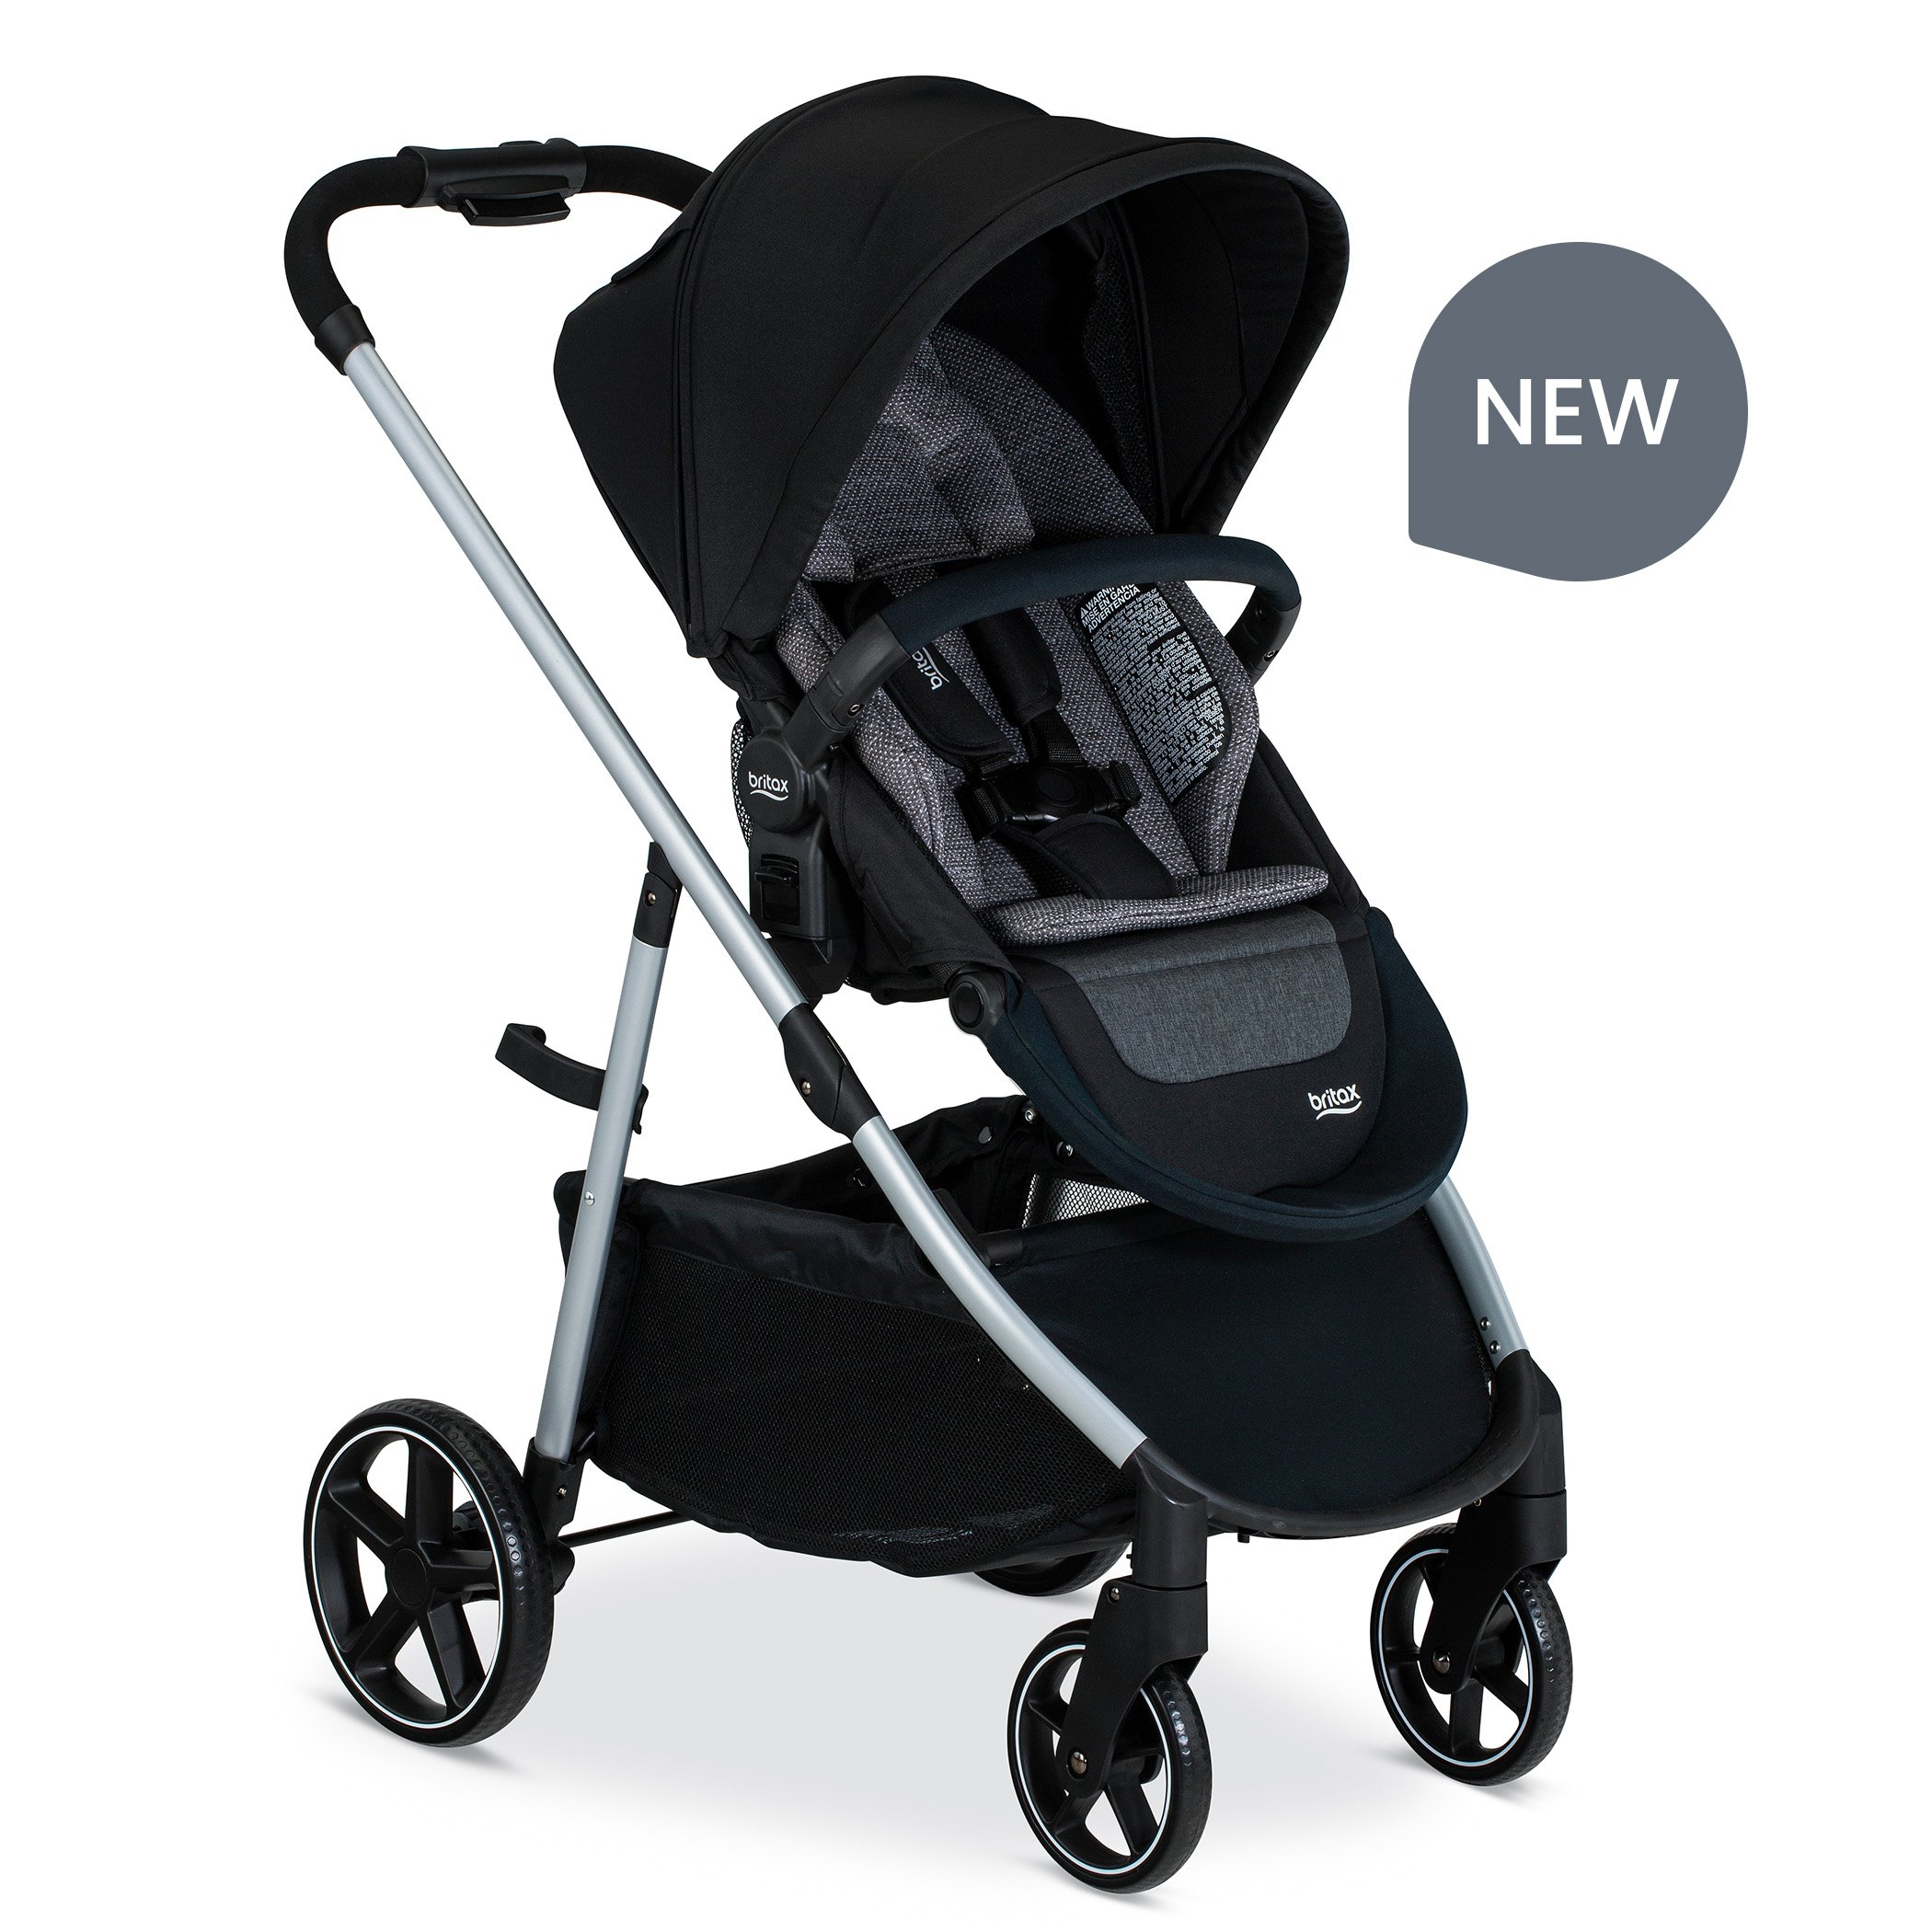 Pindot Onyx Grove Stroller with New Callout (Copy)